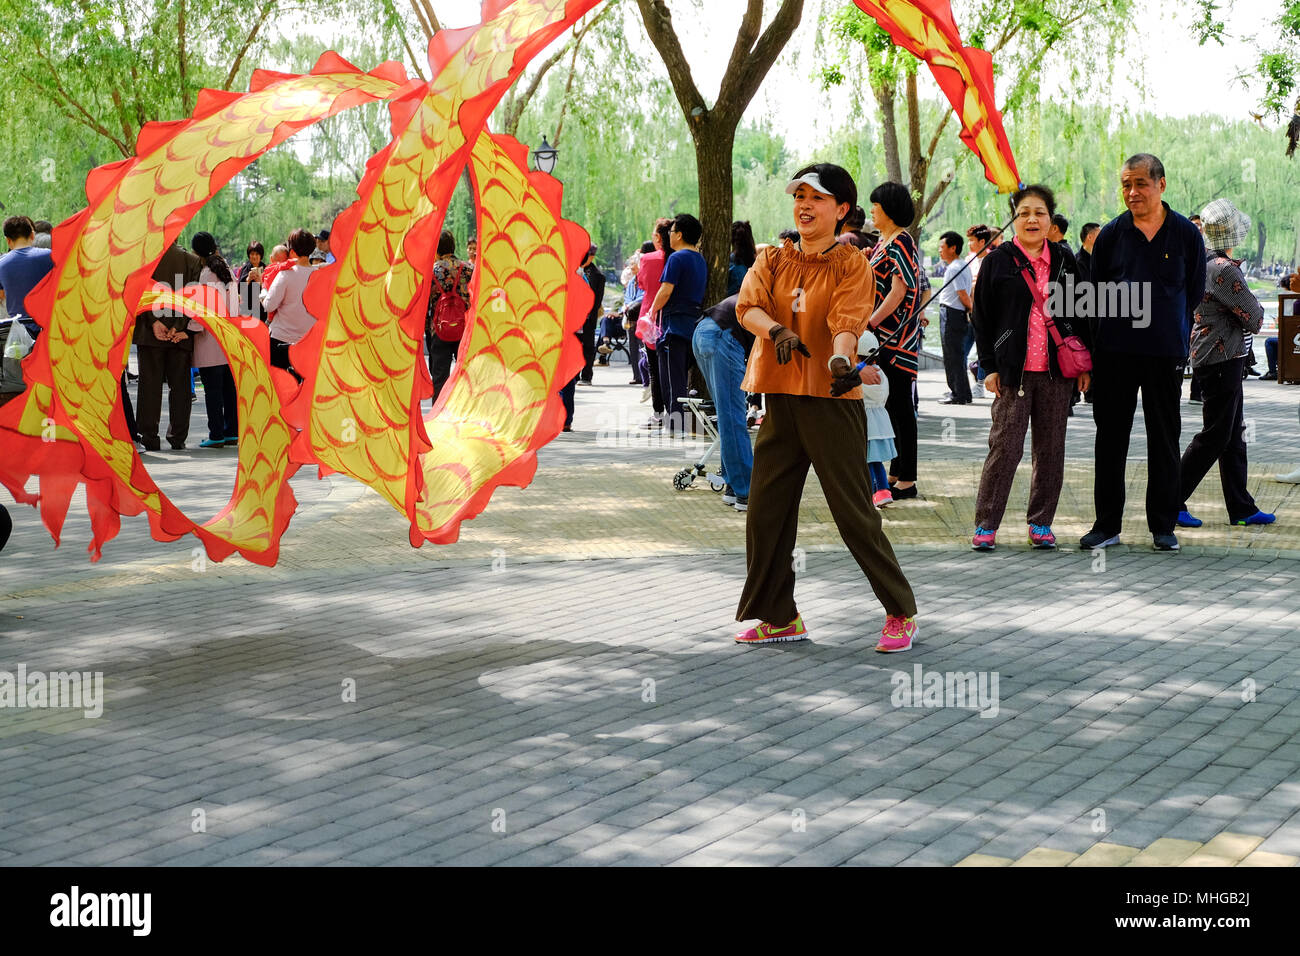 BEIJING, CHINA - APRIL 30, 2018: Traditional Chinese Silk Dance in a park. Taoranting Park is a major city park located in Xicheng District in the sou Stock Photo